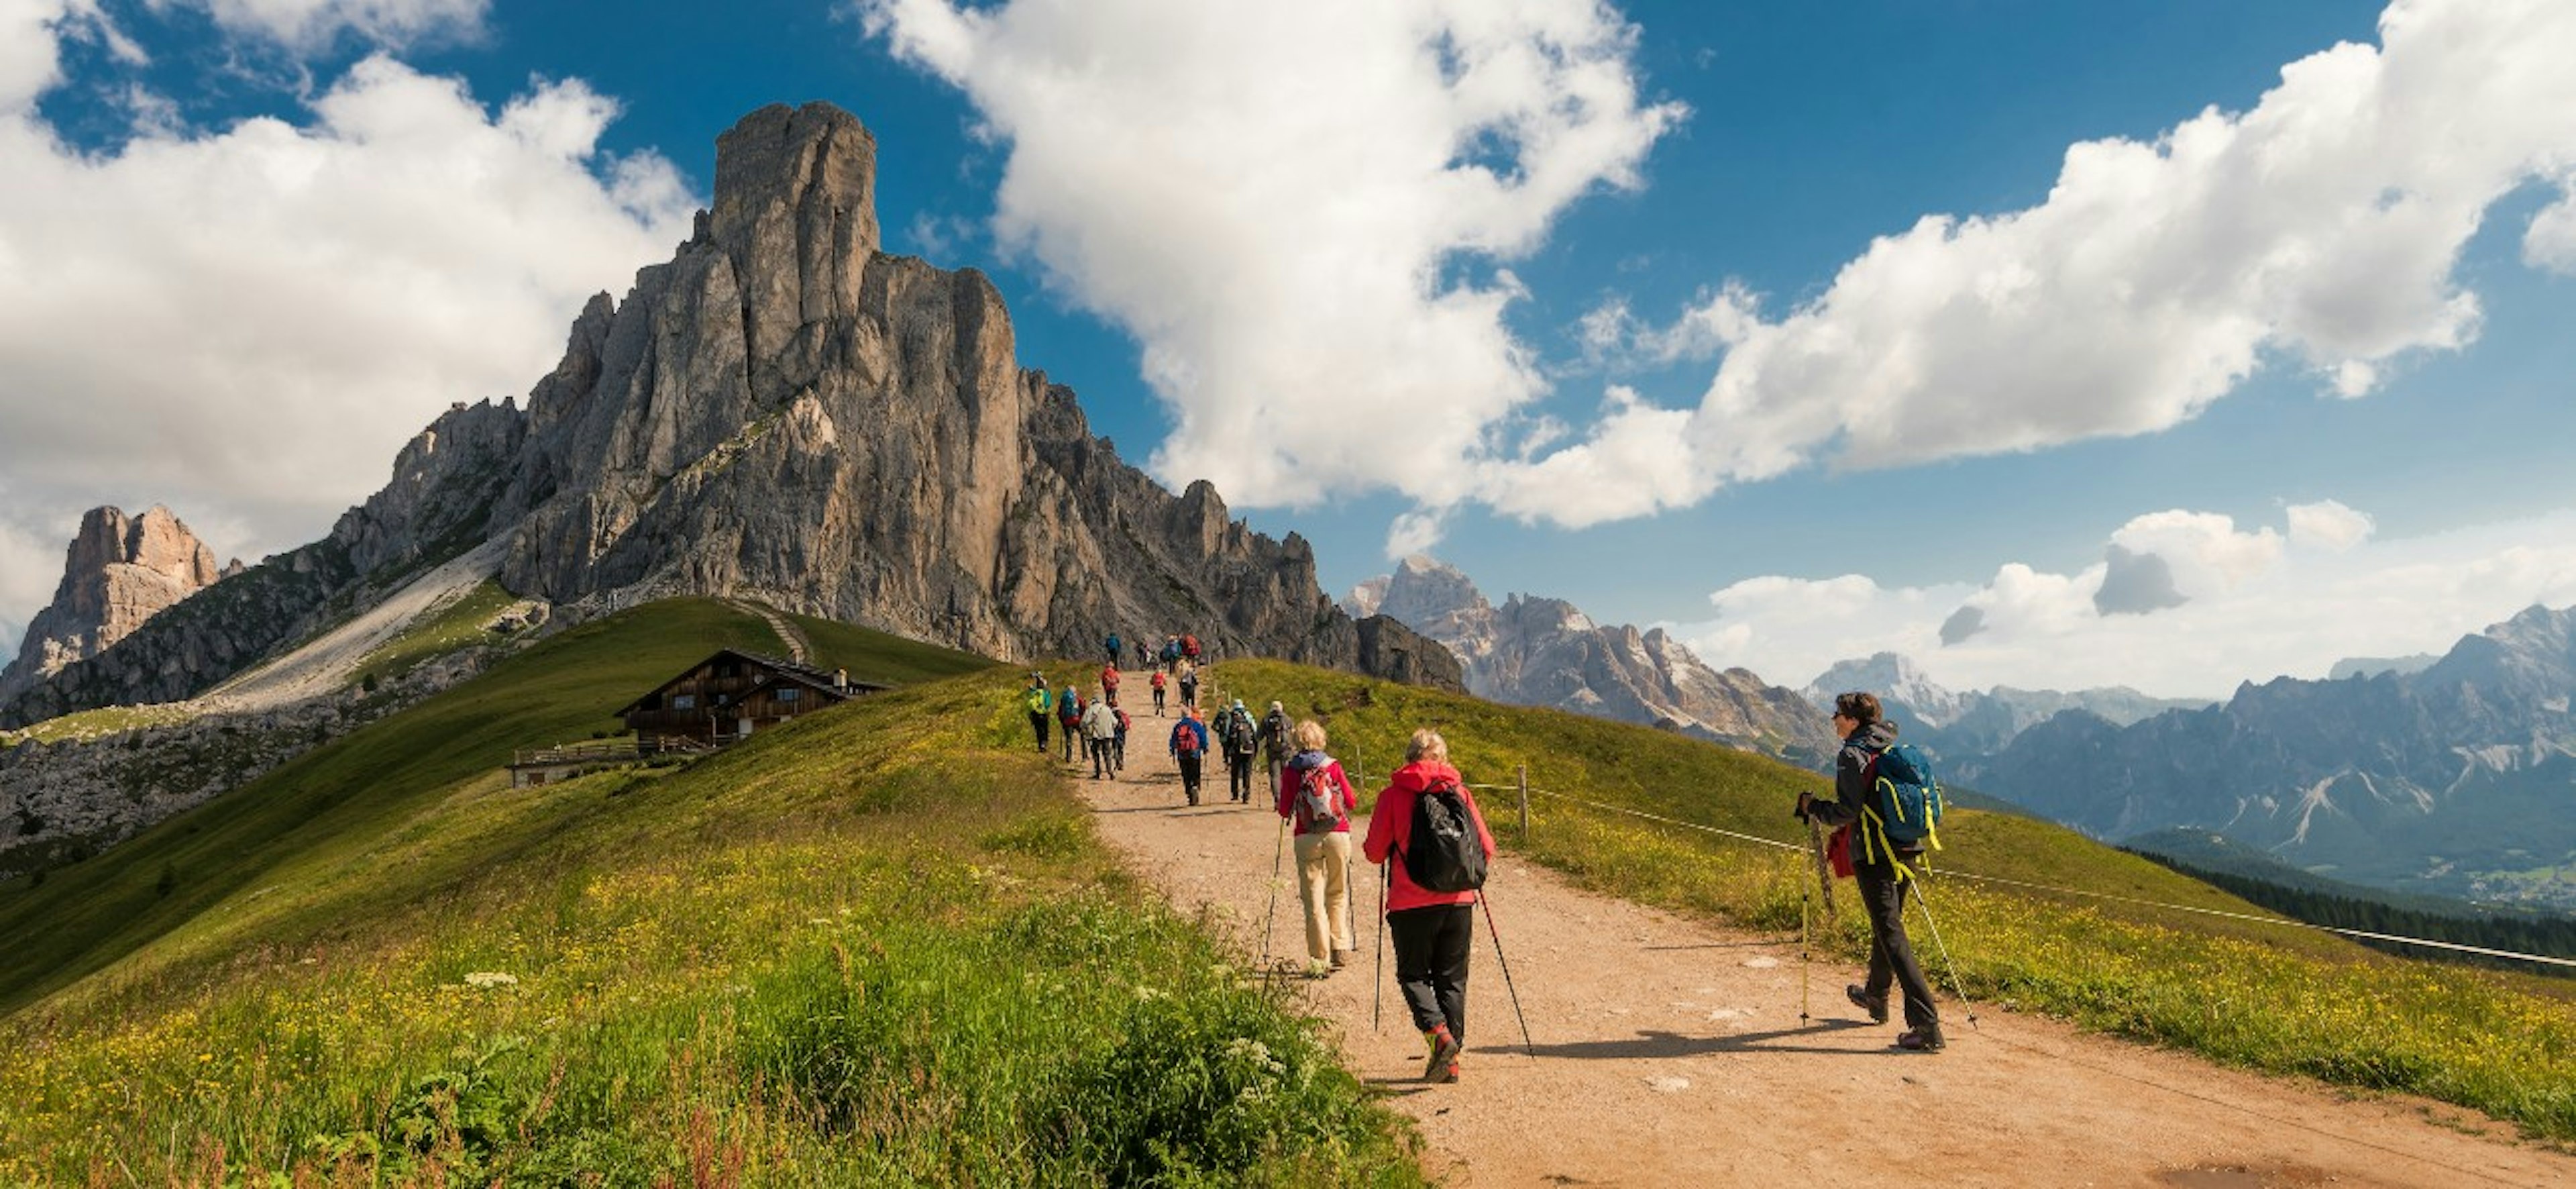 beautiful view of the Dolomites with hikers on path and grass in the foreground and hut, mountains and blue sky with clouds in the background taken on a sunny summer day